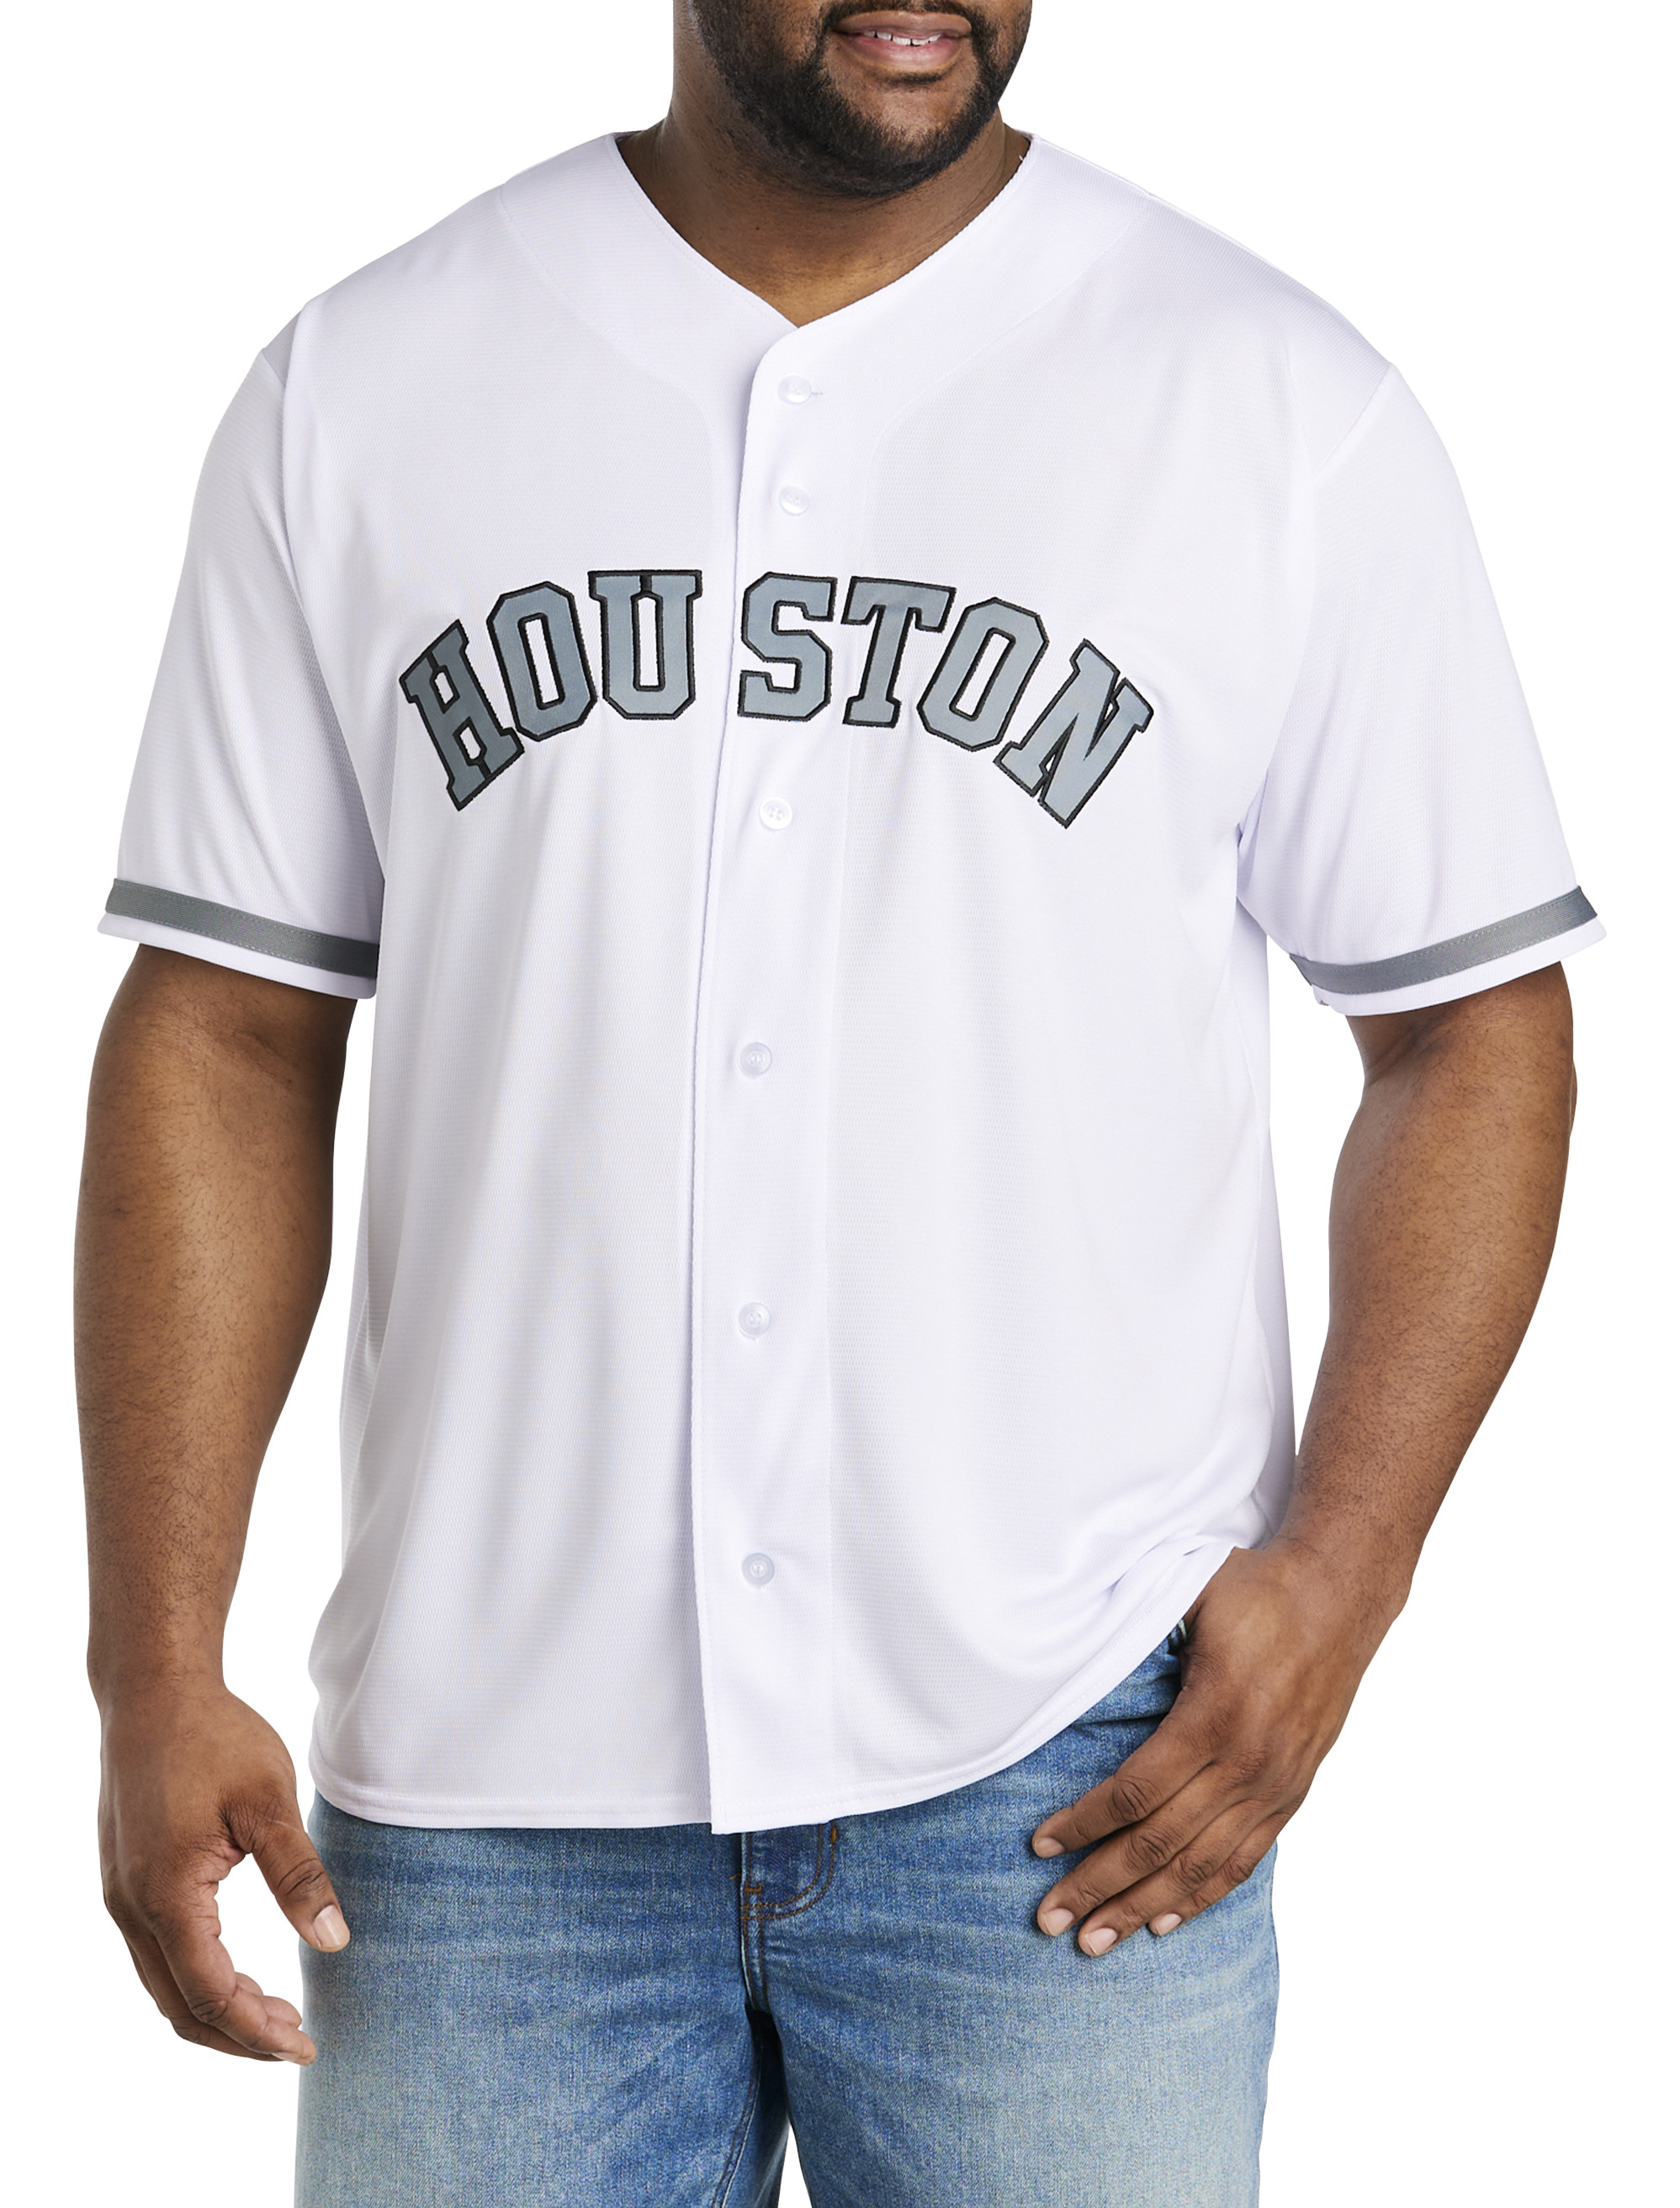 Astros Jersey Coverall